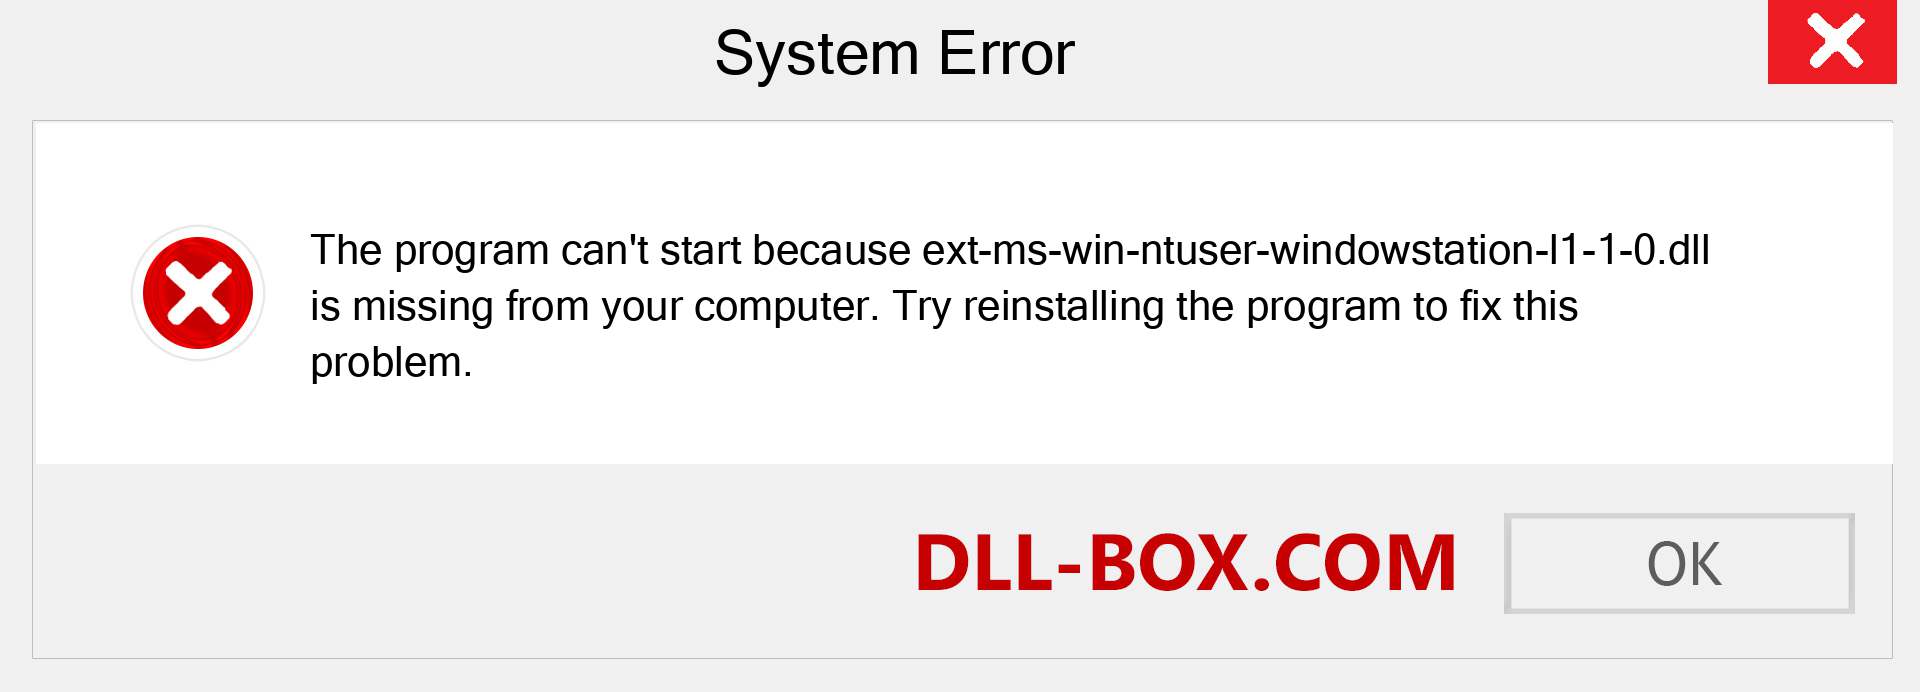  ext-ms-win-ntuser-windowstation-l1-1-0.dll file is missing?. Download for Windows 7, 8, 10 - Fix  ext-ms-win-ntuser-windowstation-l1-1-0 dll Missing Error on Windows, photos, images